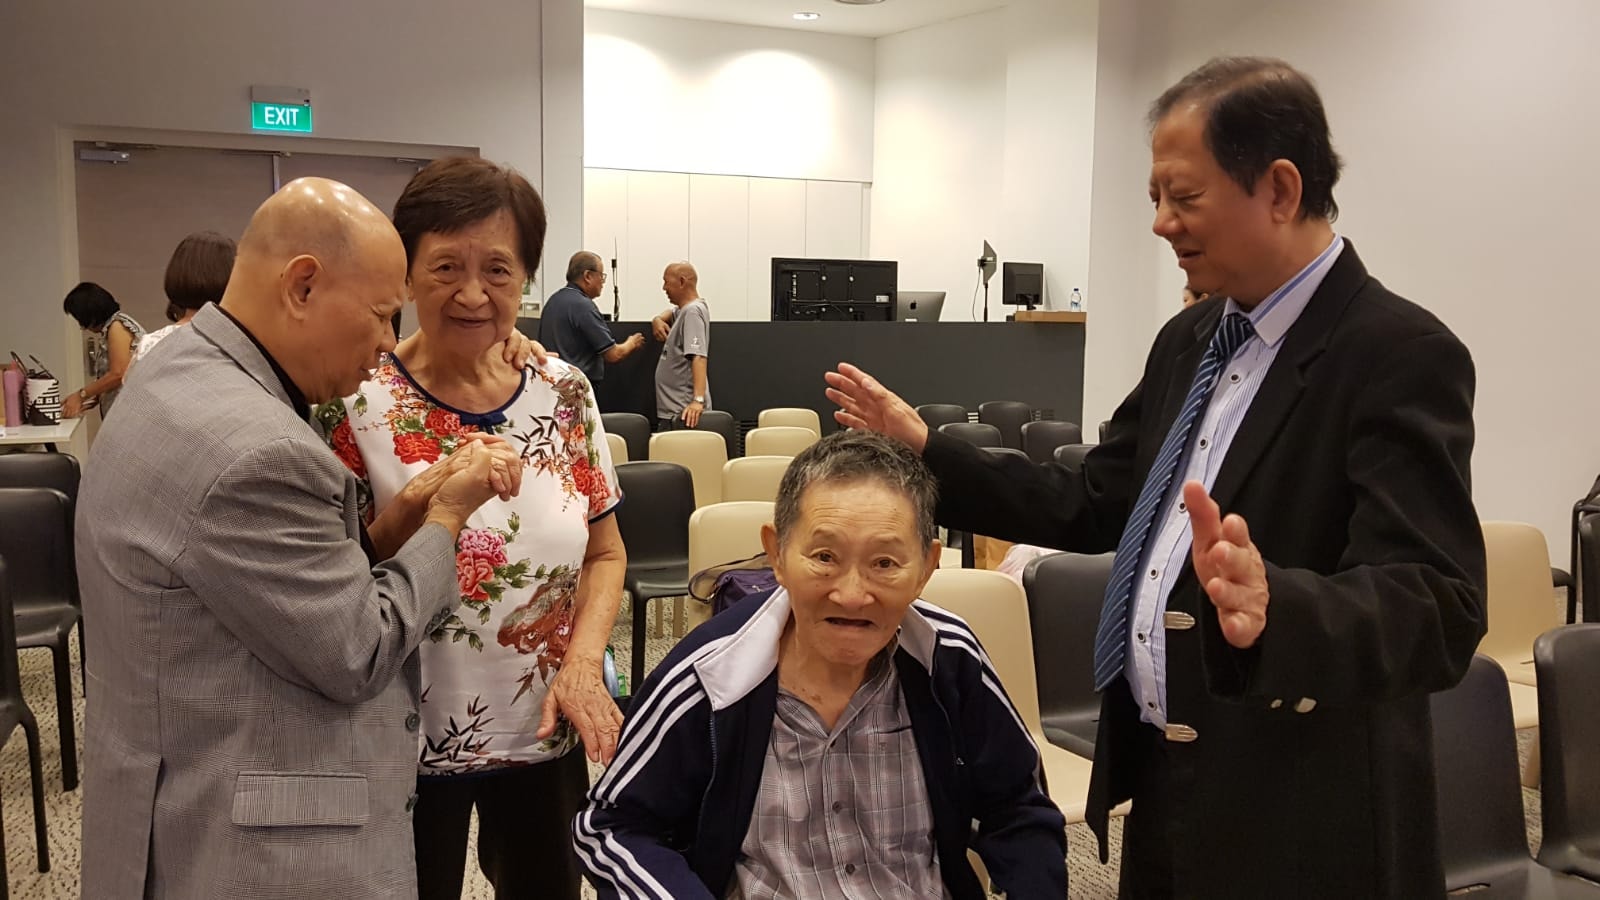 26 Jan 2019 - Day before Dads 80th birthday - He accepted Christ followed by Mum doing the same Luisa Teng